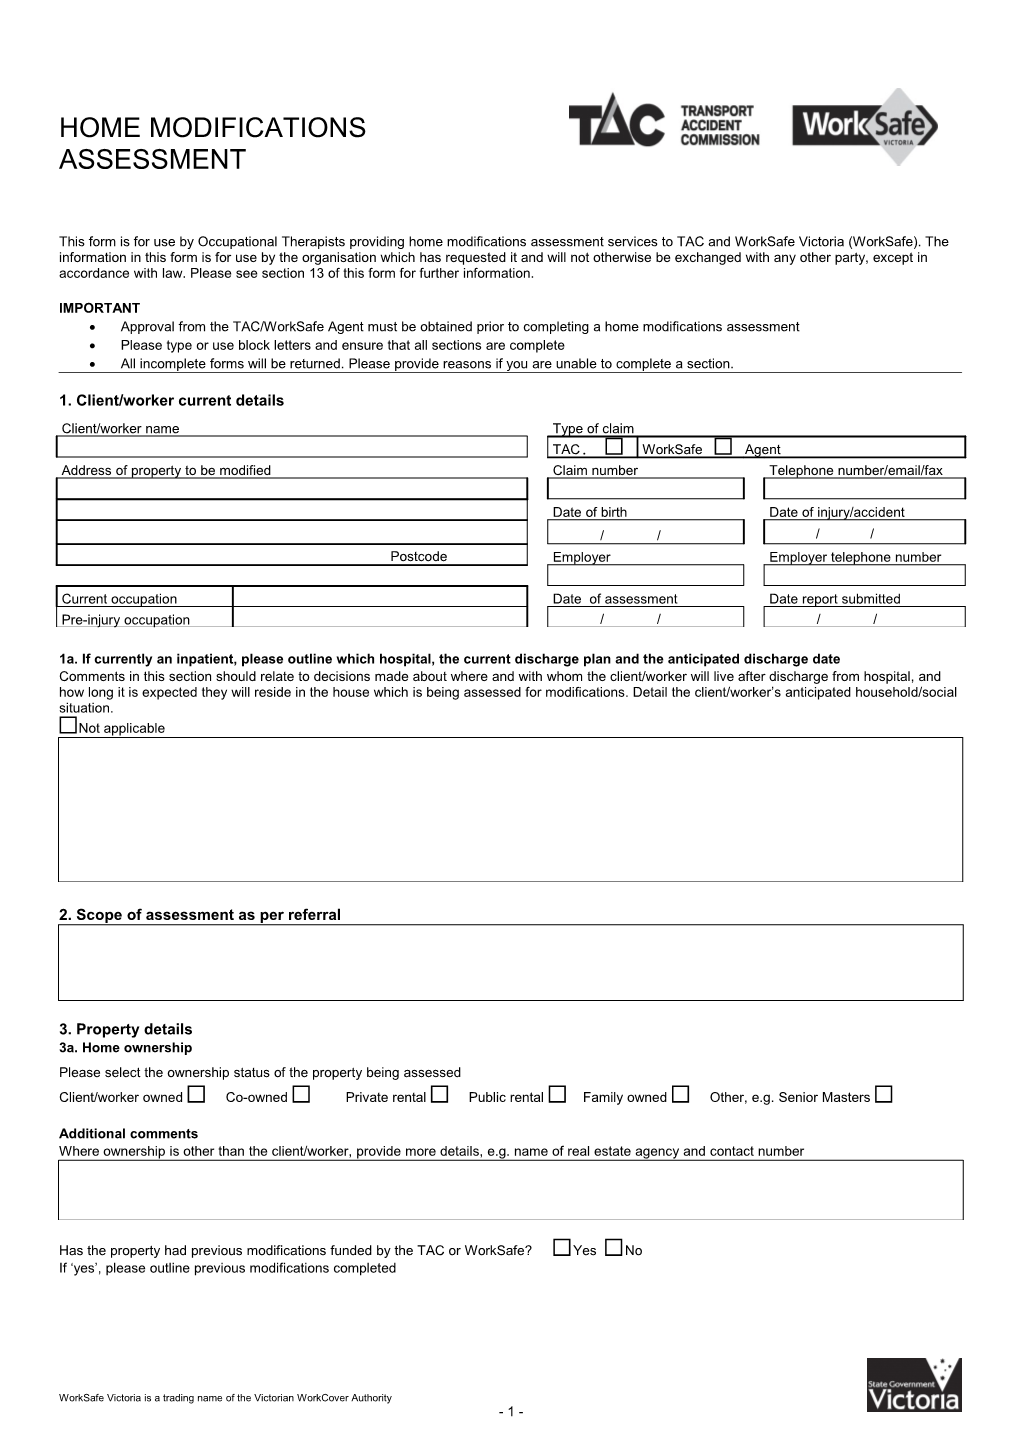 This Form Is for Use by Occupational Therapists Providing Home Modifications Assessment